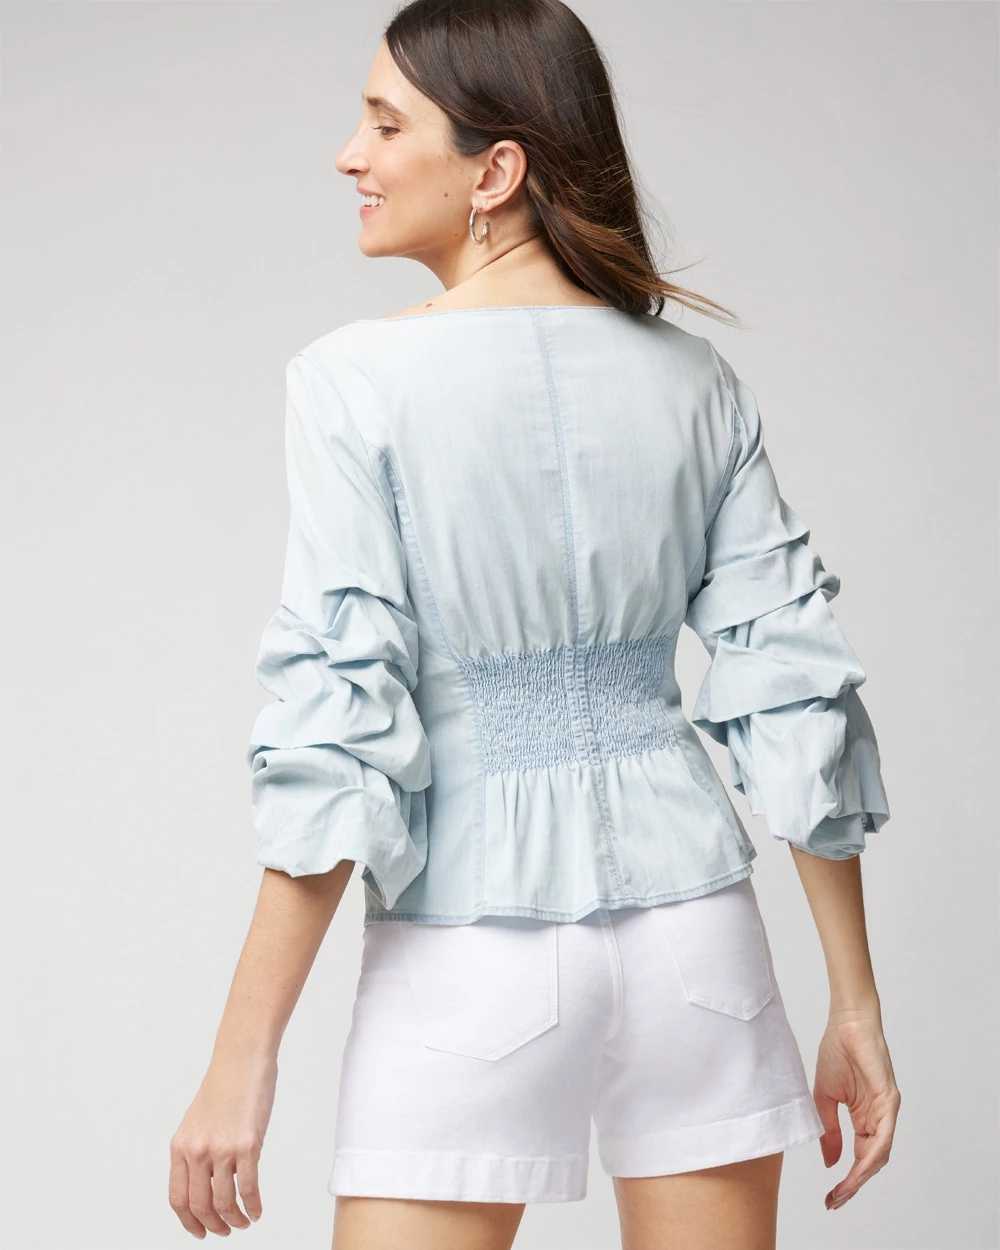 Drama Sleeve Denim Blouse click to view larger image.